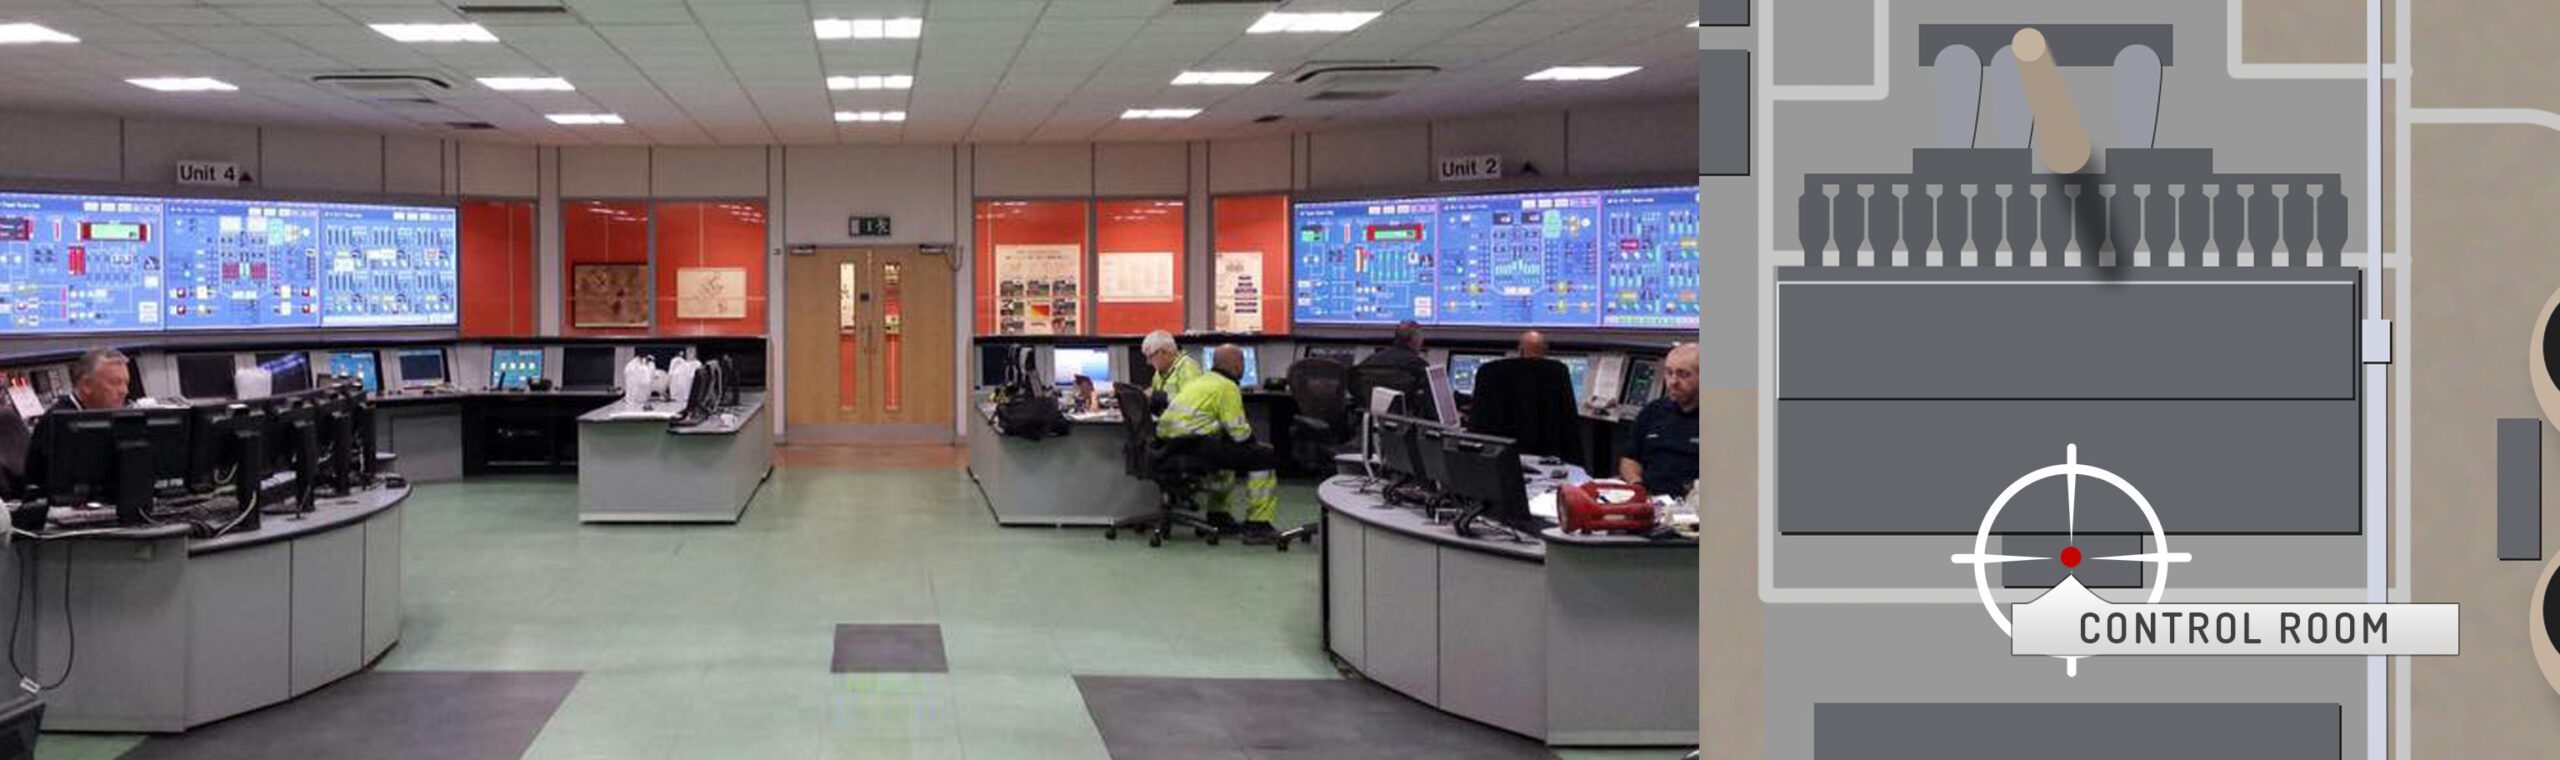 Fiddler's Ferry Power Station Control Room